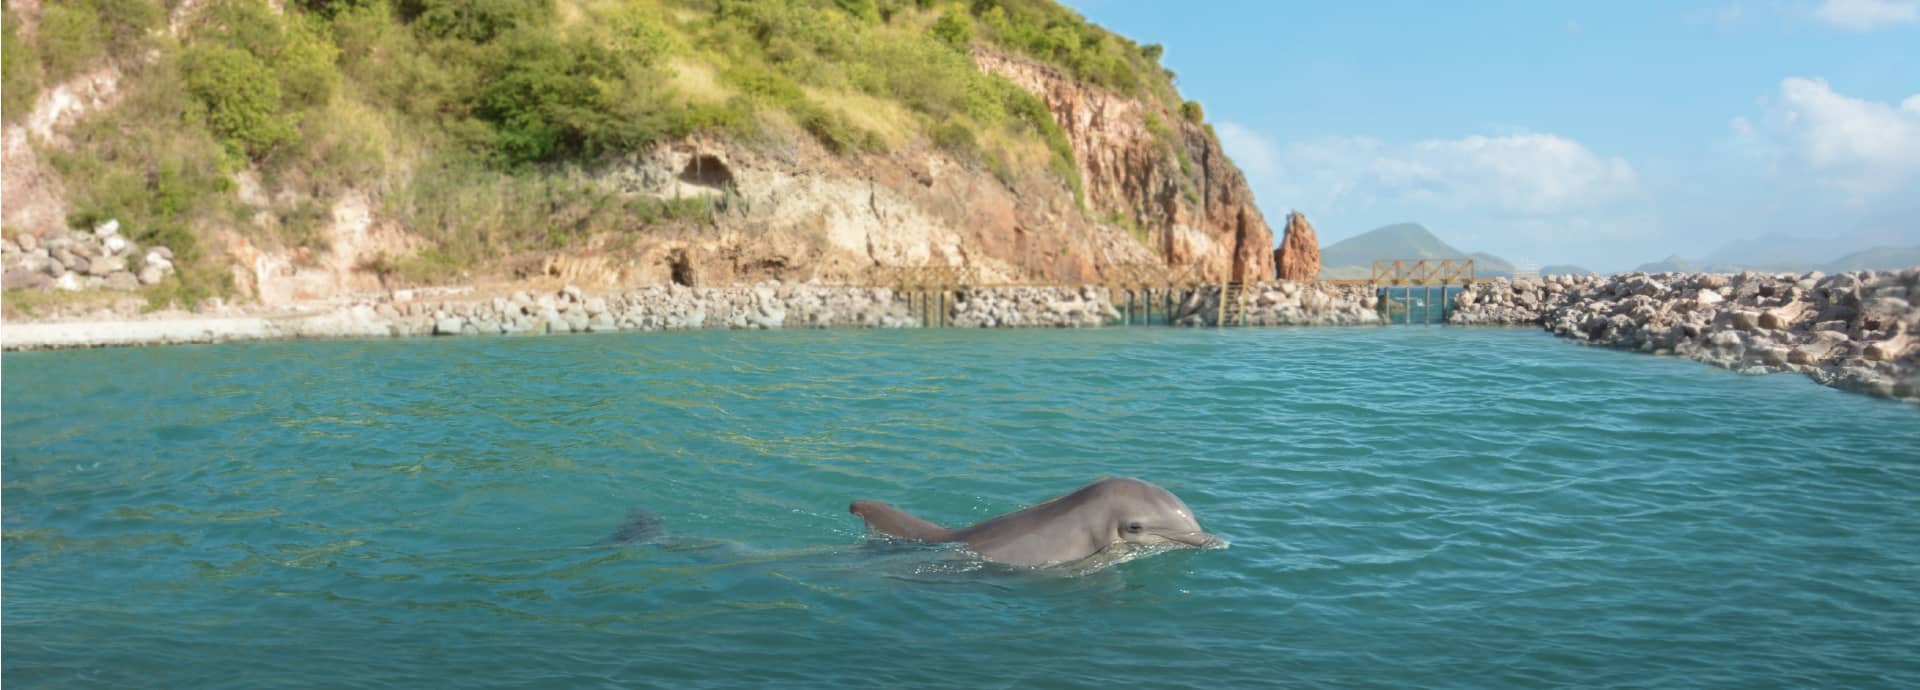 Dolphin Discovery St. Kitts